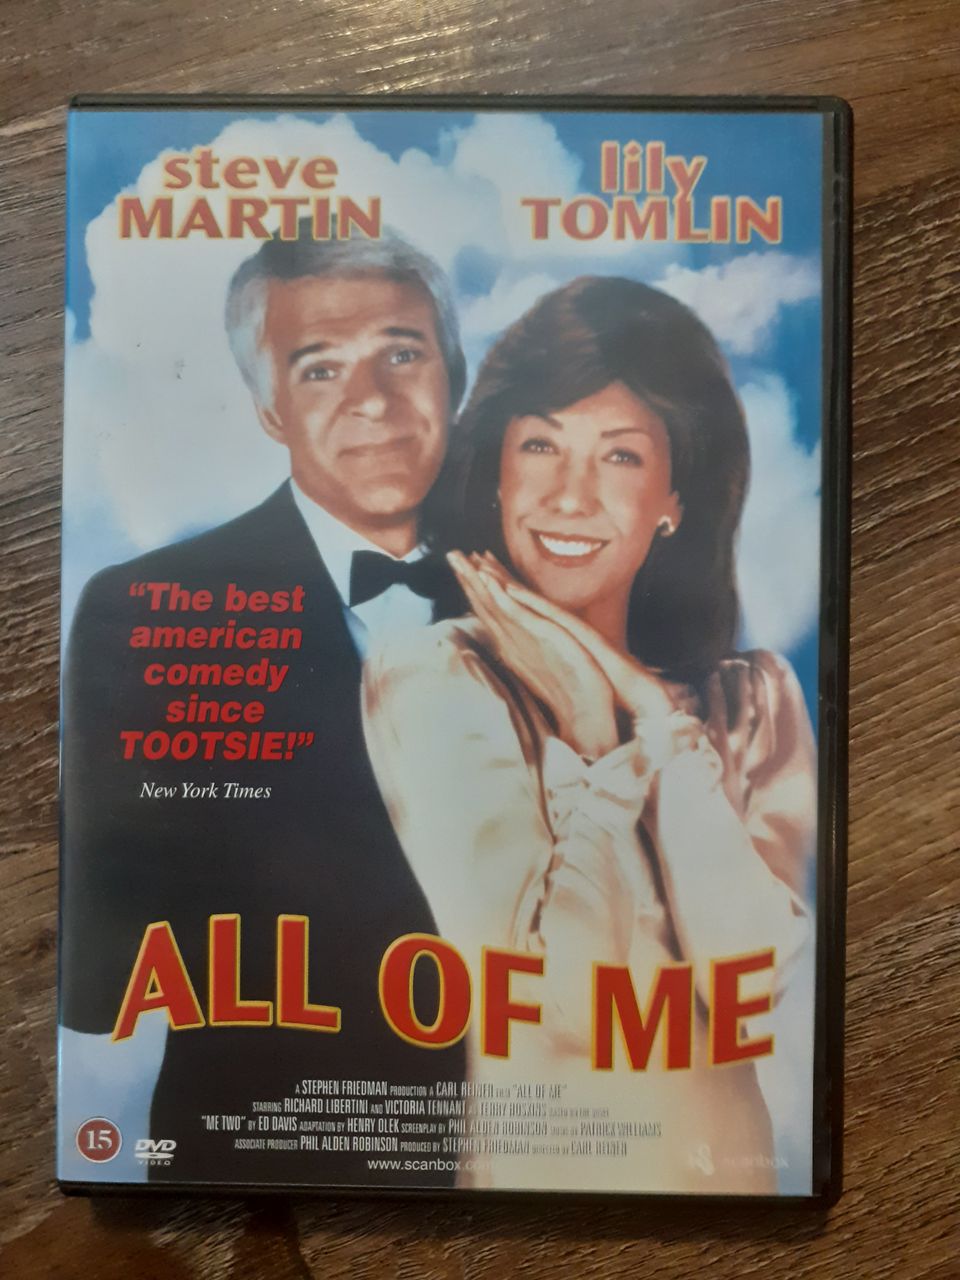 All of me - Steve Martin / Lily Tomlin